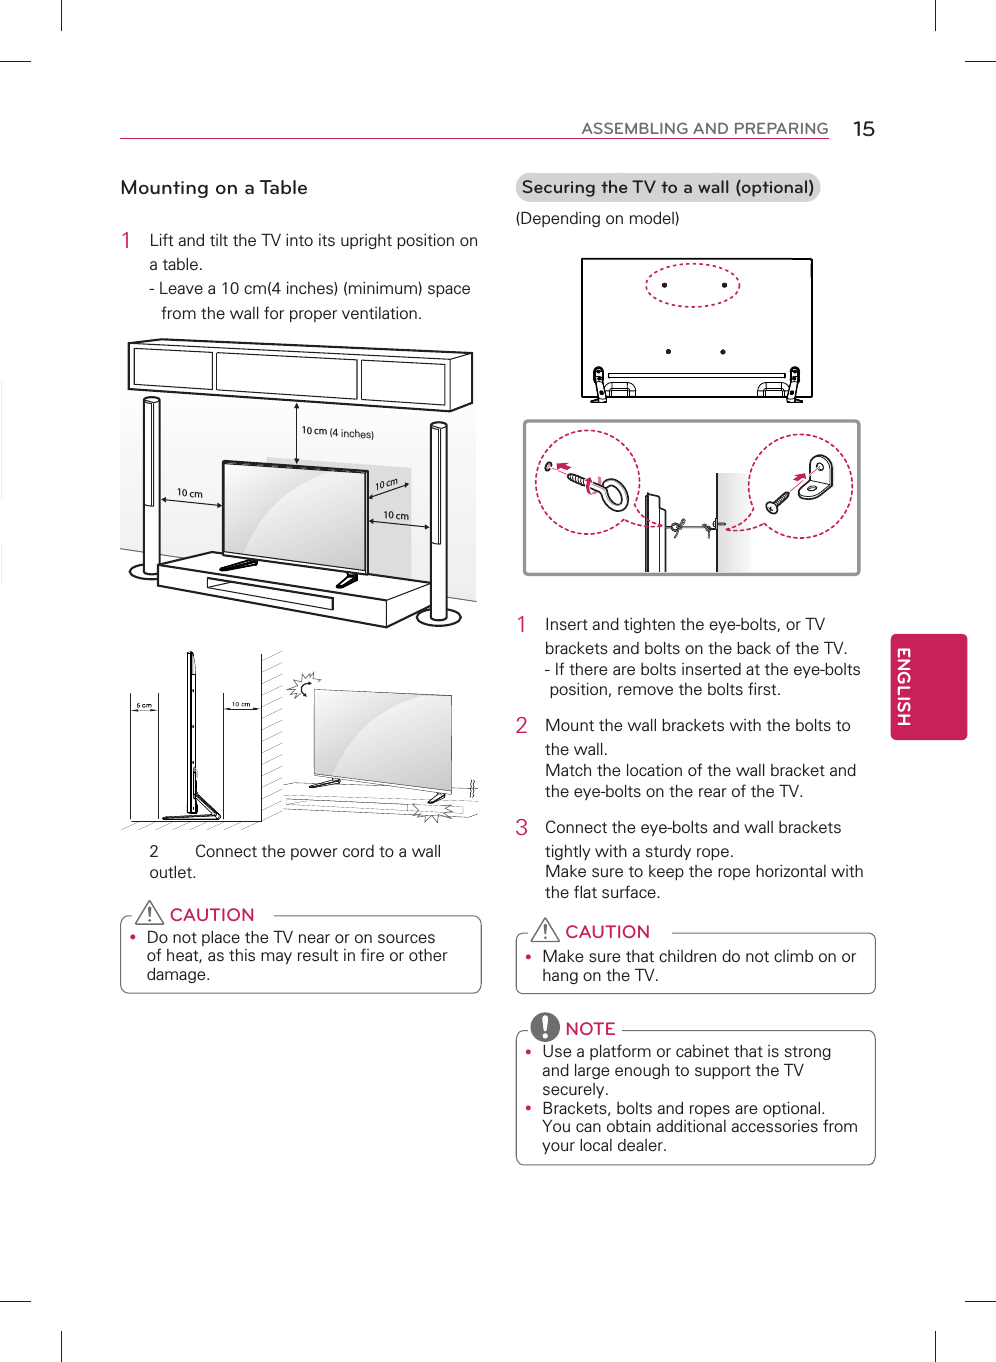 ENGLISH15ASSEMBLING AND PREPARINGMounting on a Table1  Lift and tilt the TV into its upright position on a table.- Leave a 10 cm(4 inches) (minimum) space from the wall for proper ventilation.10 cm10 cm10 cm10 cm2  Connect the power cord to a wall outlet.y Do not place the TV near or on sources of heat, as this may result in fire or other damage. CAUTIONSecuring the TV to a wall (optional)(Depending on model)1  Insert and tighten the eye-bolts, or TV brackets and bolts on the back of the TV. -  If there are bolts inserted at the eye-bolts position, remove the bolts first.2  Mount the wall brackets with the bolts to the wall. Match the location of the wall bracket and the eye-bolts on the rear of the TV.3  Connect the eye-bolts and wall brackets tightly with a sturdy rope. Make sure to keep the rope horizontal with the flat surface.y Make sure that children do not climb on or hang on the TV. CAUTIONy Use a platform or cabinet that is strong and large enough to support the TV securely.y Brackets, bolts and ropes are optional. You can obtain additional accessories from your local dealer. NOTE(4 inches)